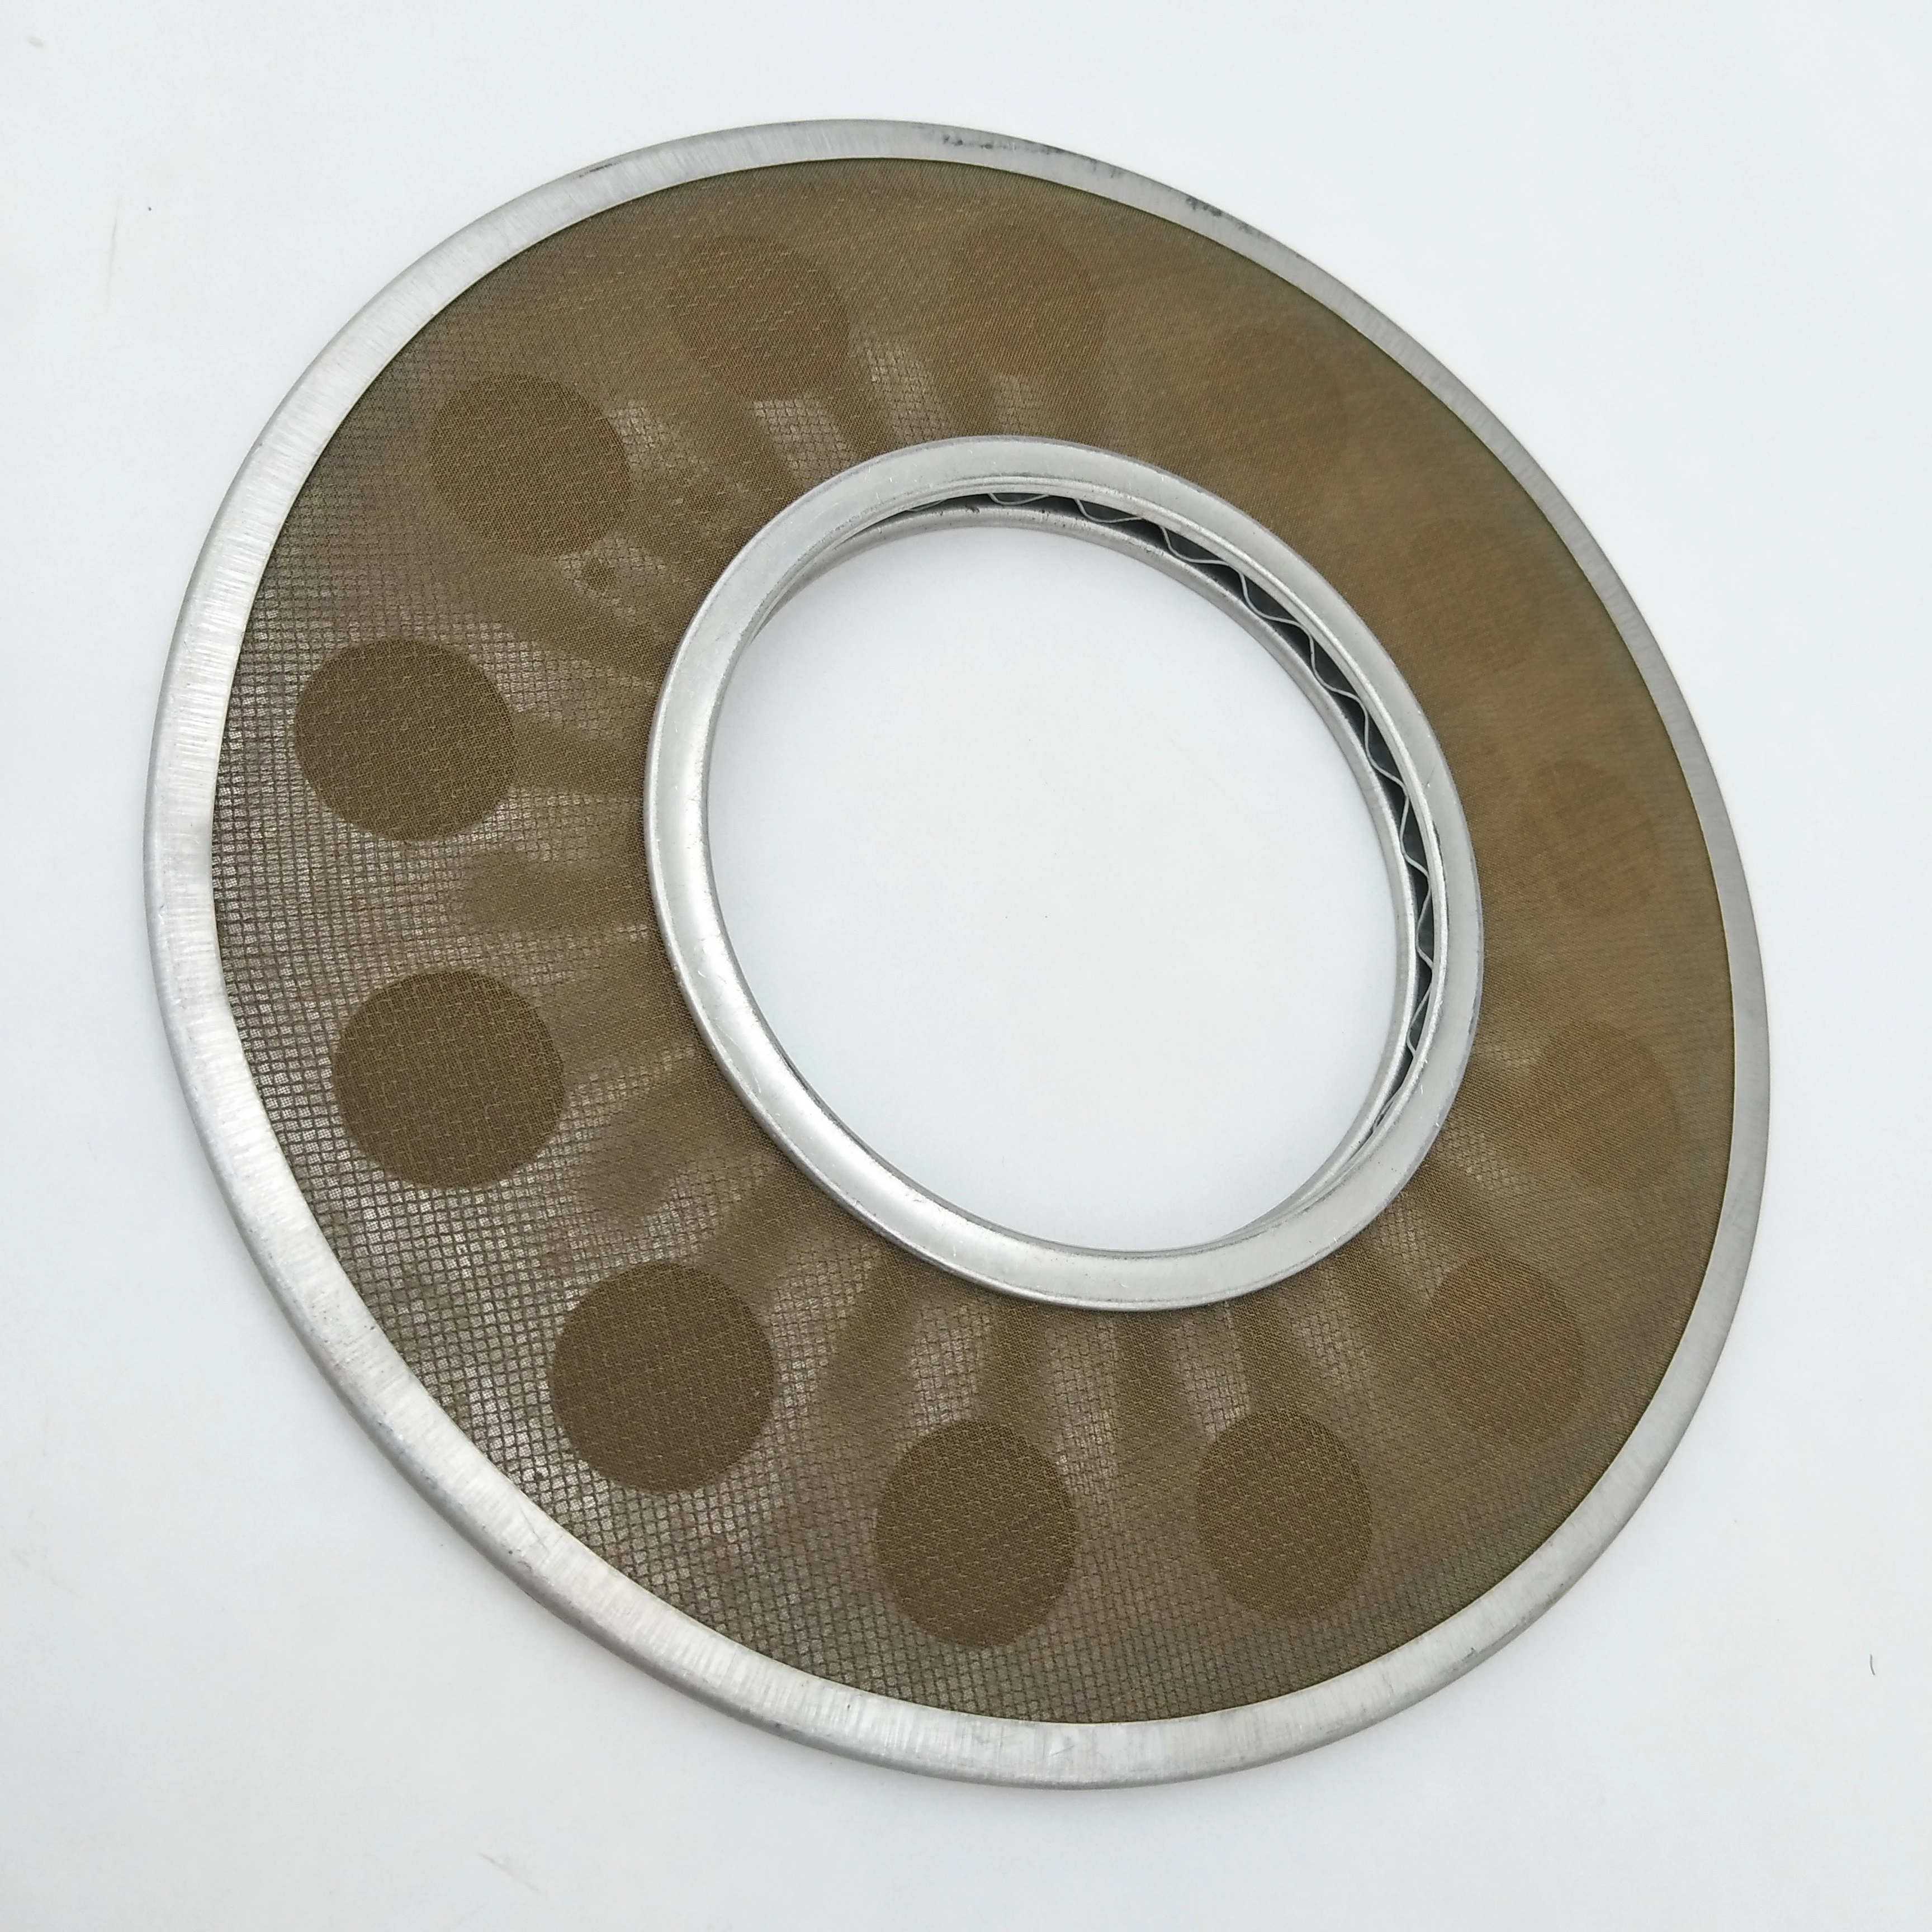 Customized size 1- 635 Mesh 304 Stainless Steel Wire Mesh Filter Screen Disc.